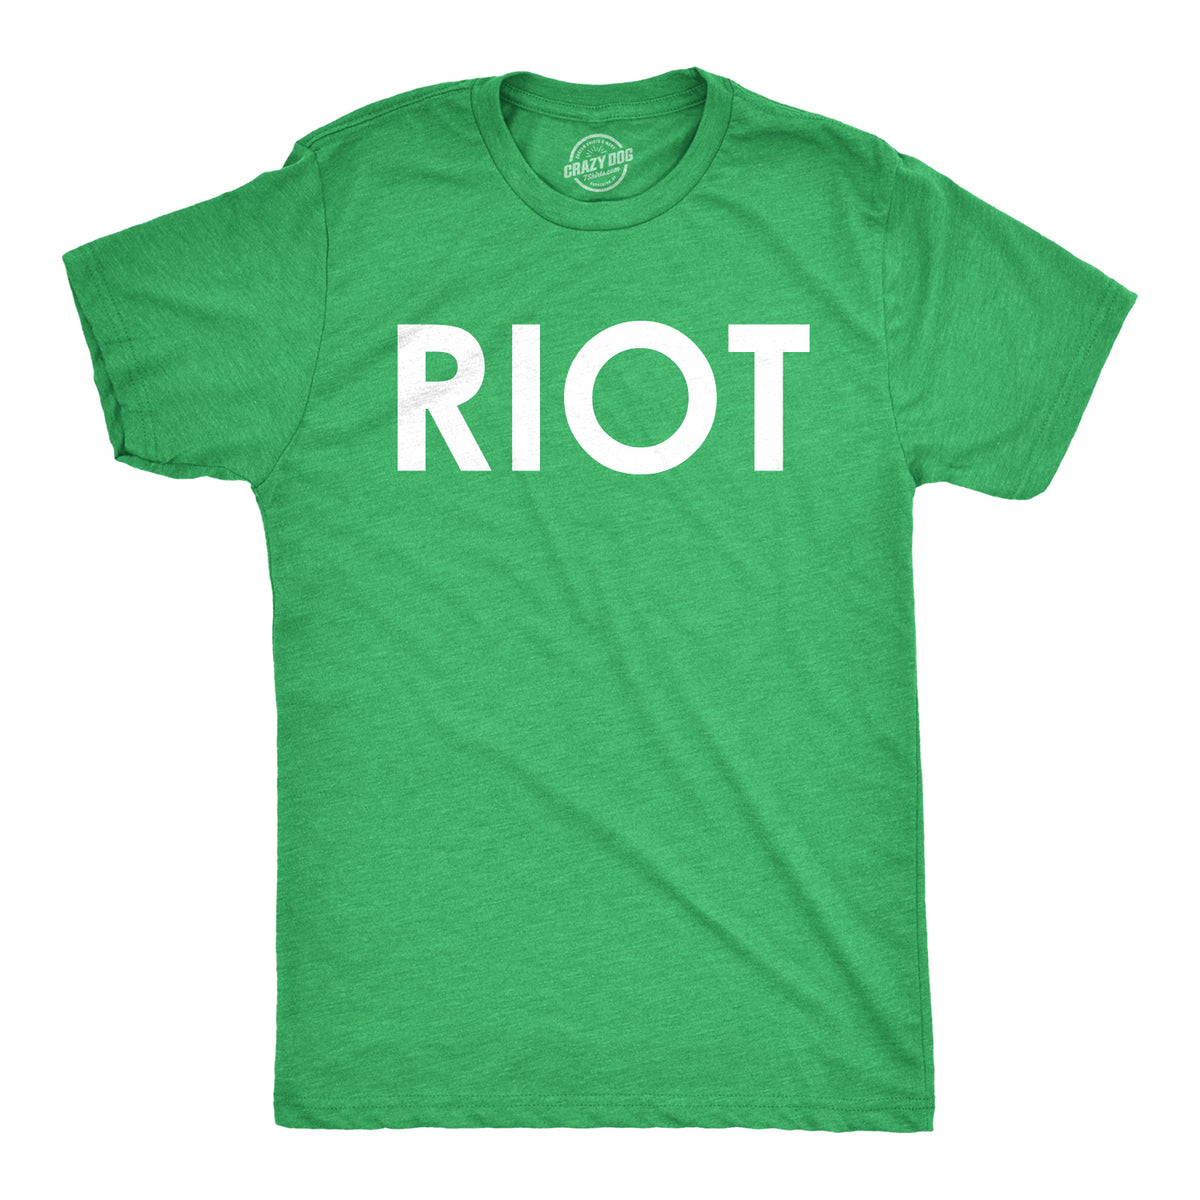 Funny Heather Green Riot Mens T Shirt Nerdy Political Tee